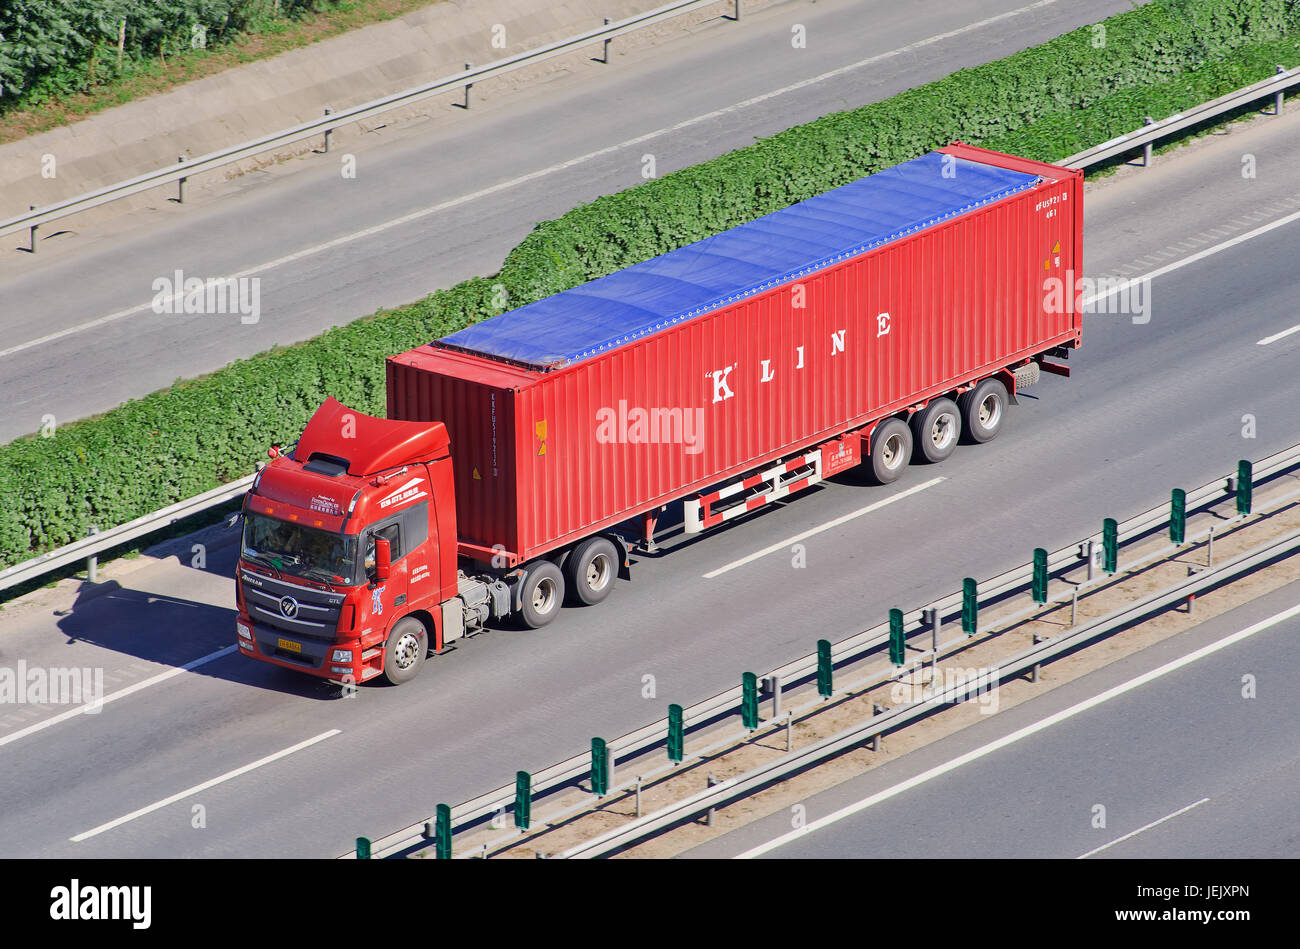 BEIJING-JUNE 30, 2015. Chinese truck with K Line container. Kawasaki Kisen Kaisha (K Line) is one of the largest Japanese transportation companies. Stock Photo